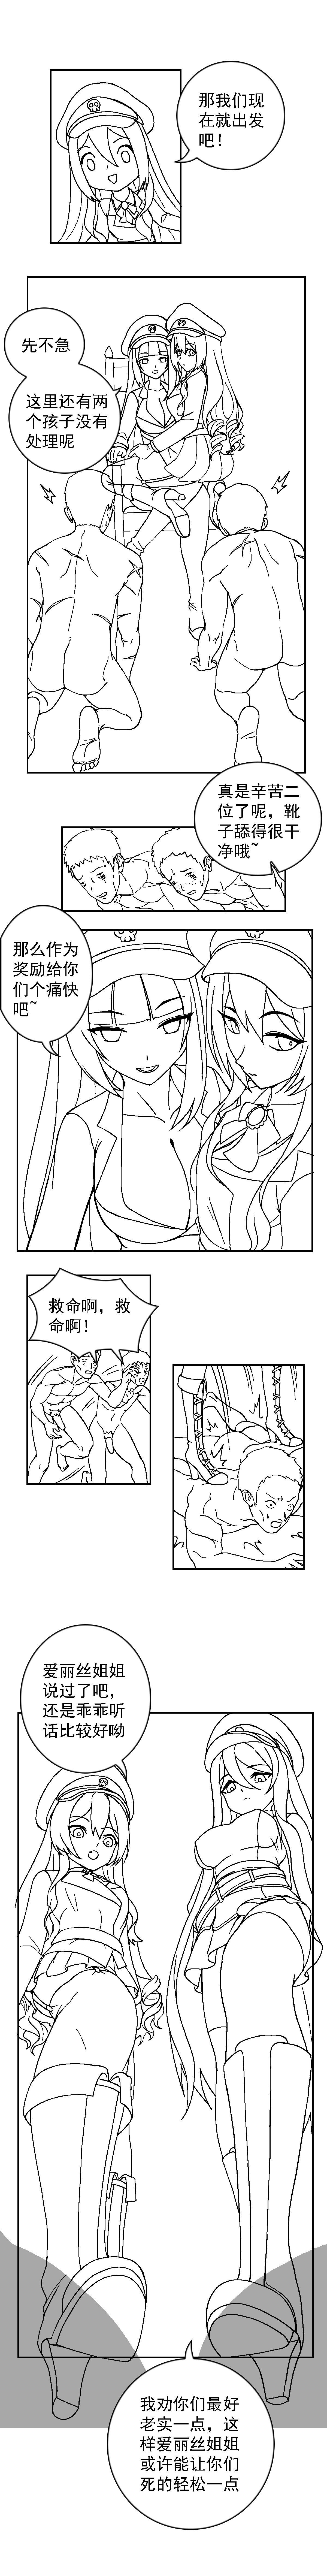 Hidden Camera [Weixiefashi] The Cruel Empire Executioners black-and-white [帝国处刑官爱丽丝2：残酷的处刑天使][黑白] Gay Pissing - Page 5